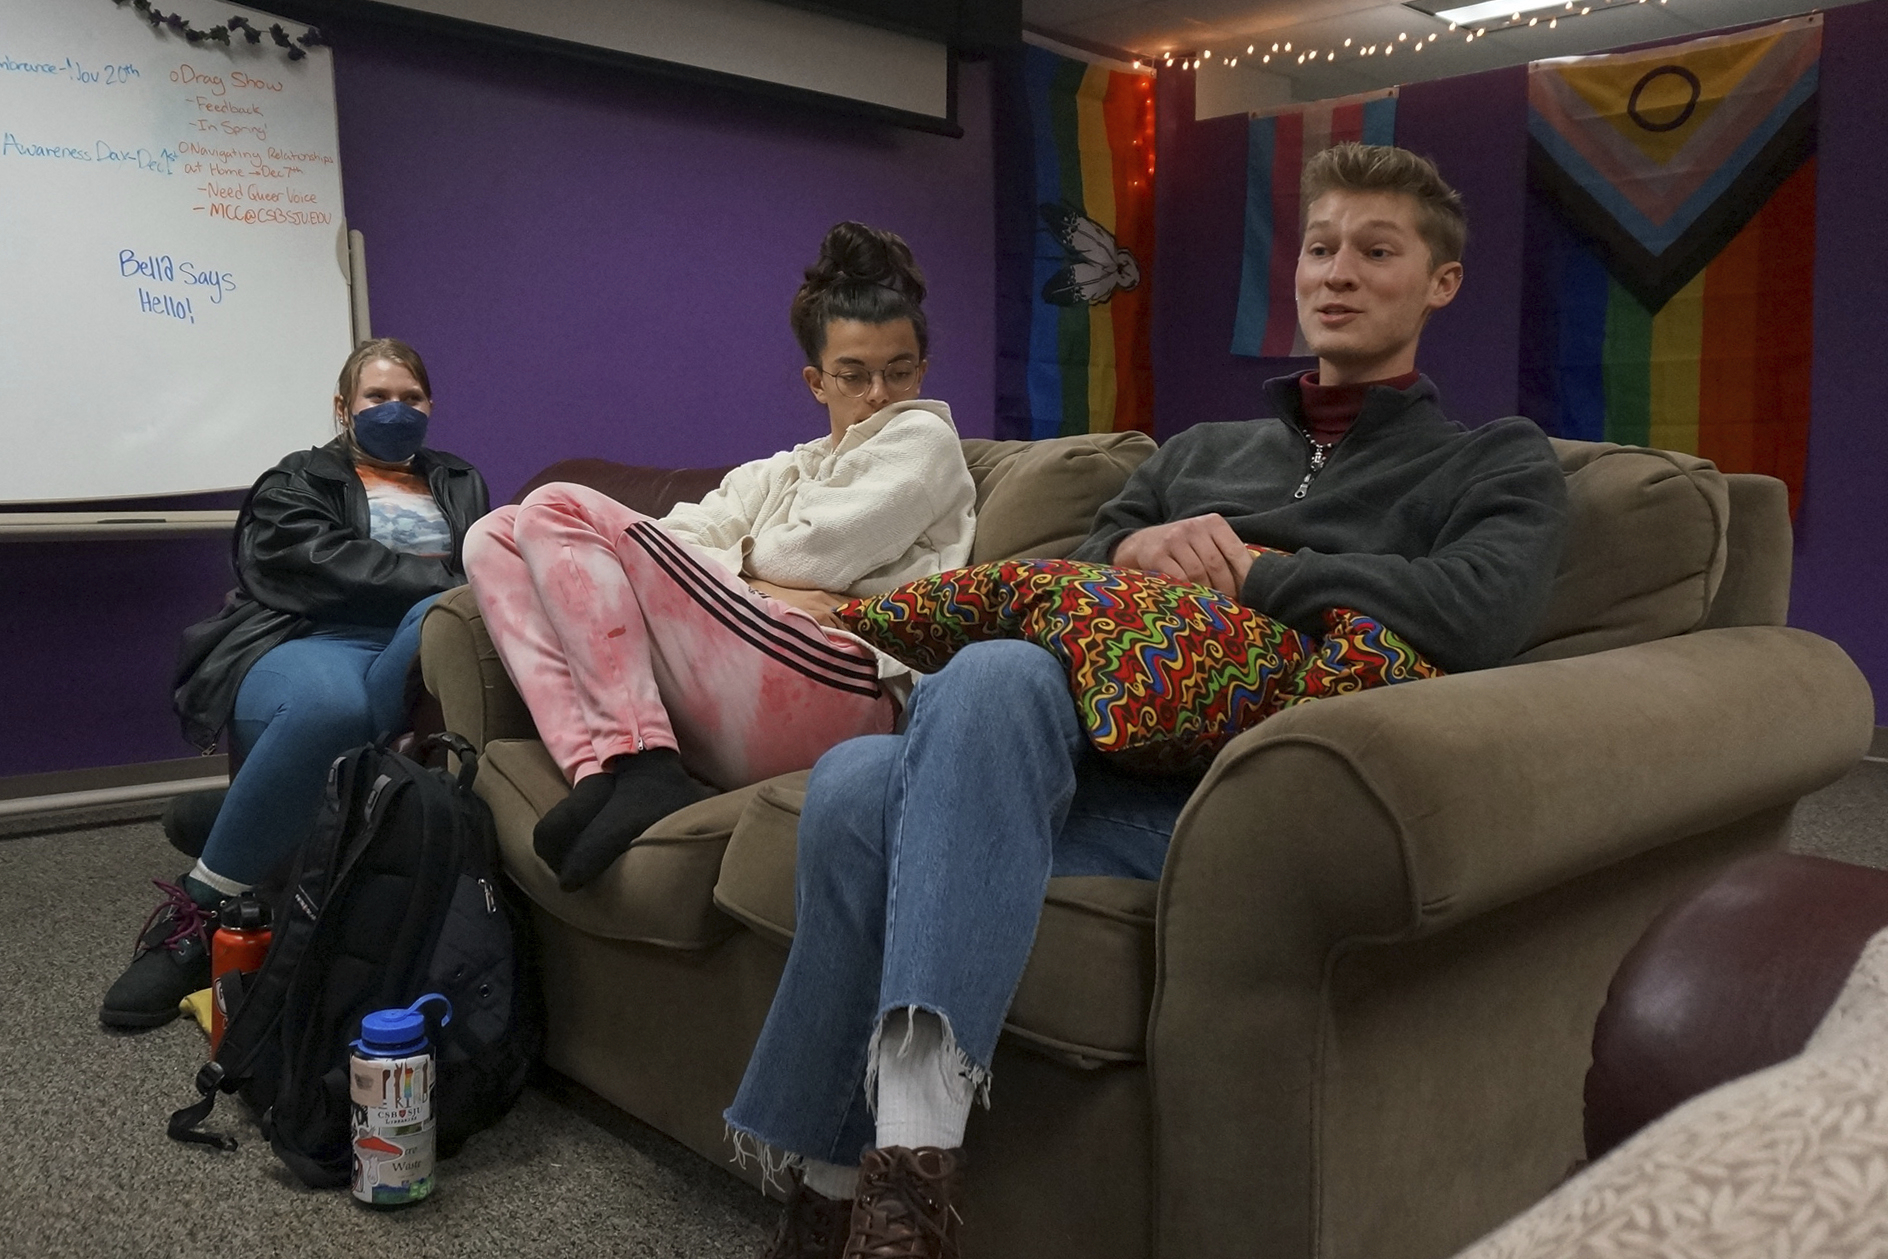 Ryan Imm, Sean Fisher and Sam Schug (from right to left) sit in the dedicated lounge of QPLUS, the LGBTQ student organization for the College of Saint Benedict and Saint John's University for which they serve as coordinators, on the college's campus in St. Joseph, Minn., on Tuesday, Nov. 8, 2022. The three students say they are encouraged by the Catholic institutions' efforts to affirm LGBTQ students like them, such as making QPLUS an official, funded organization from the student club it previously was. (AP Photo/Giovanna Dell'Orto)